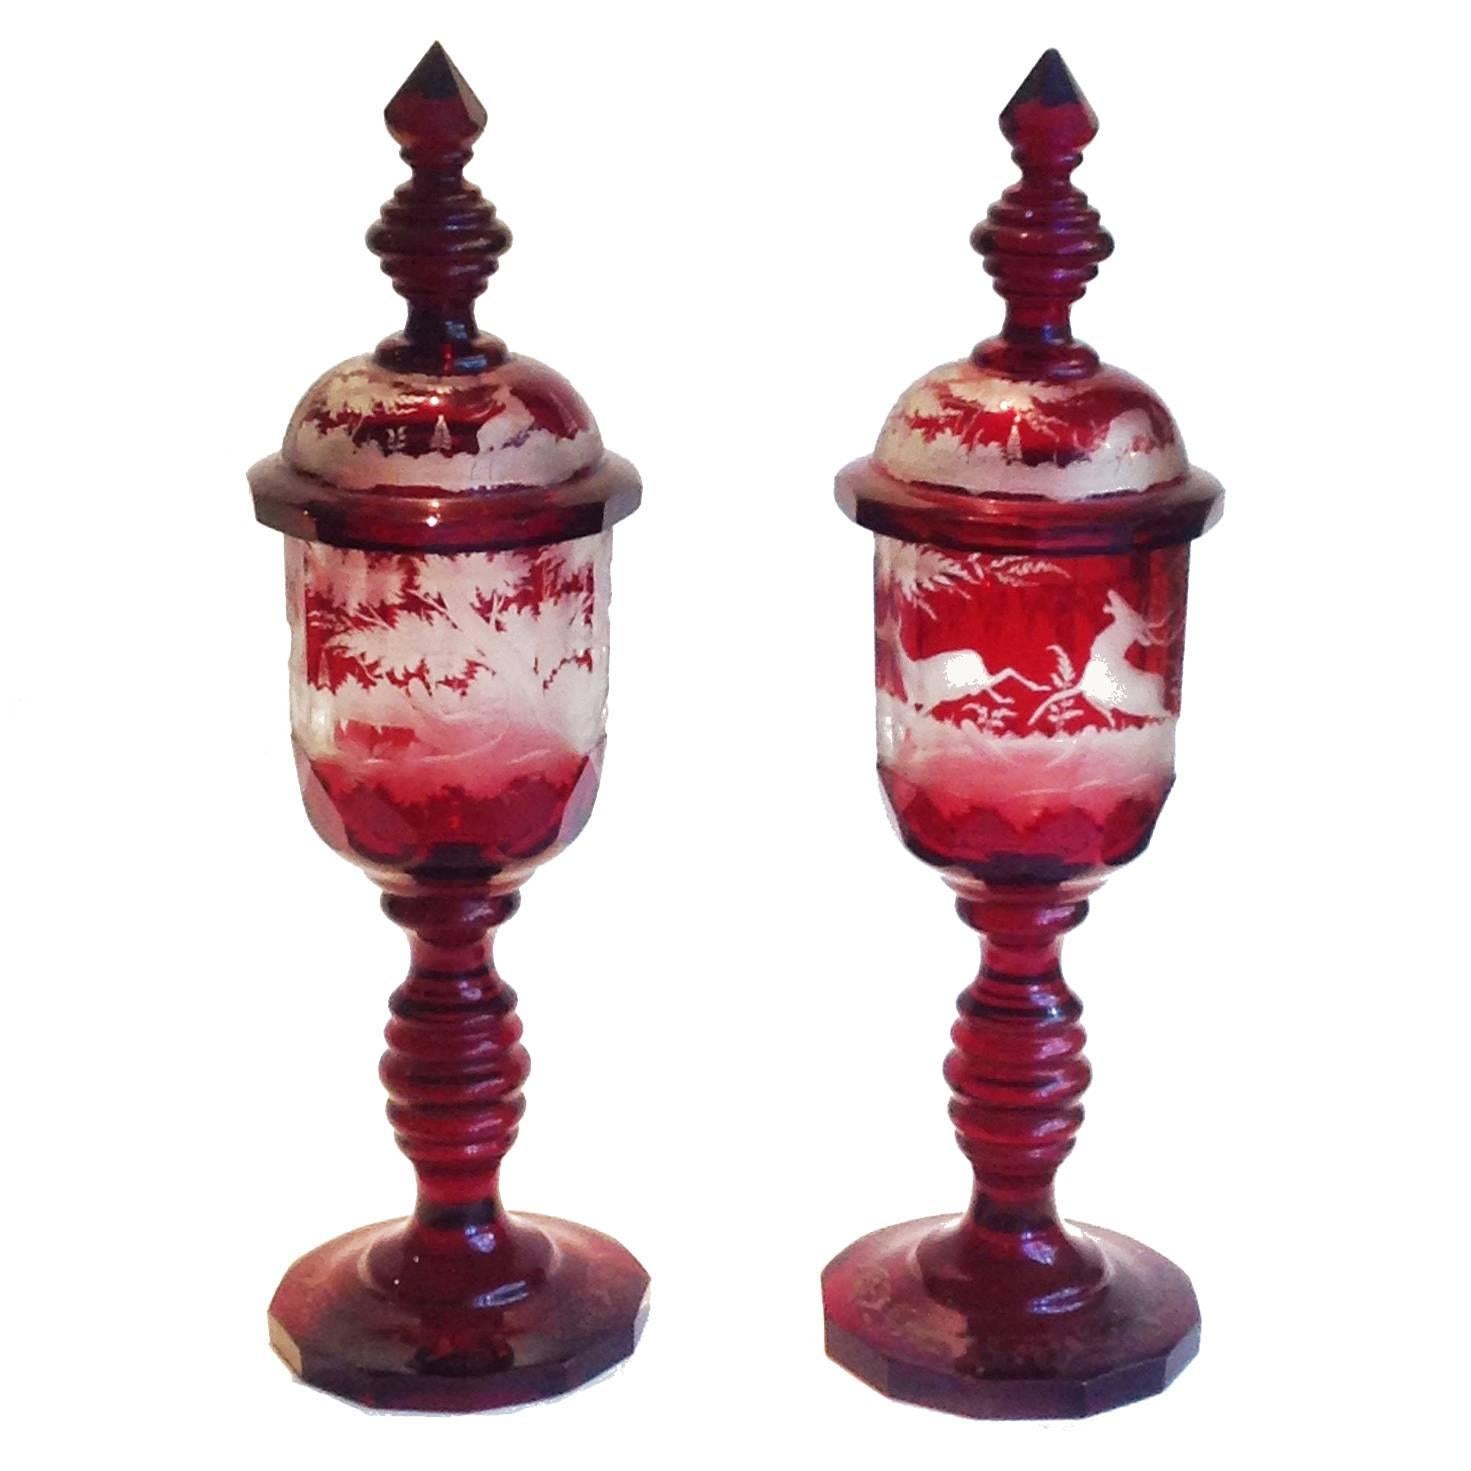 German Czech Bohemian Pair of Ruby-Stained Covered Goblets